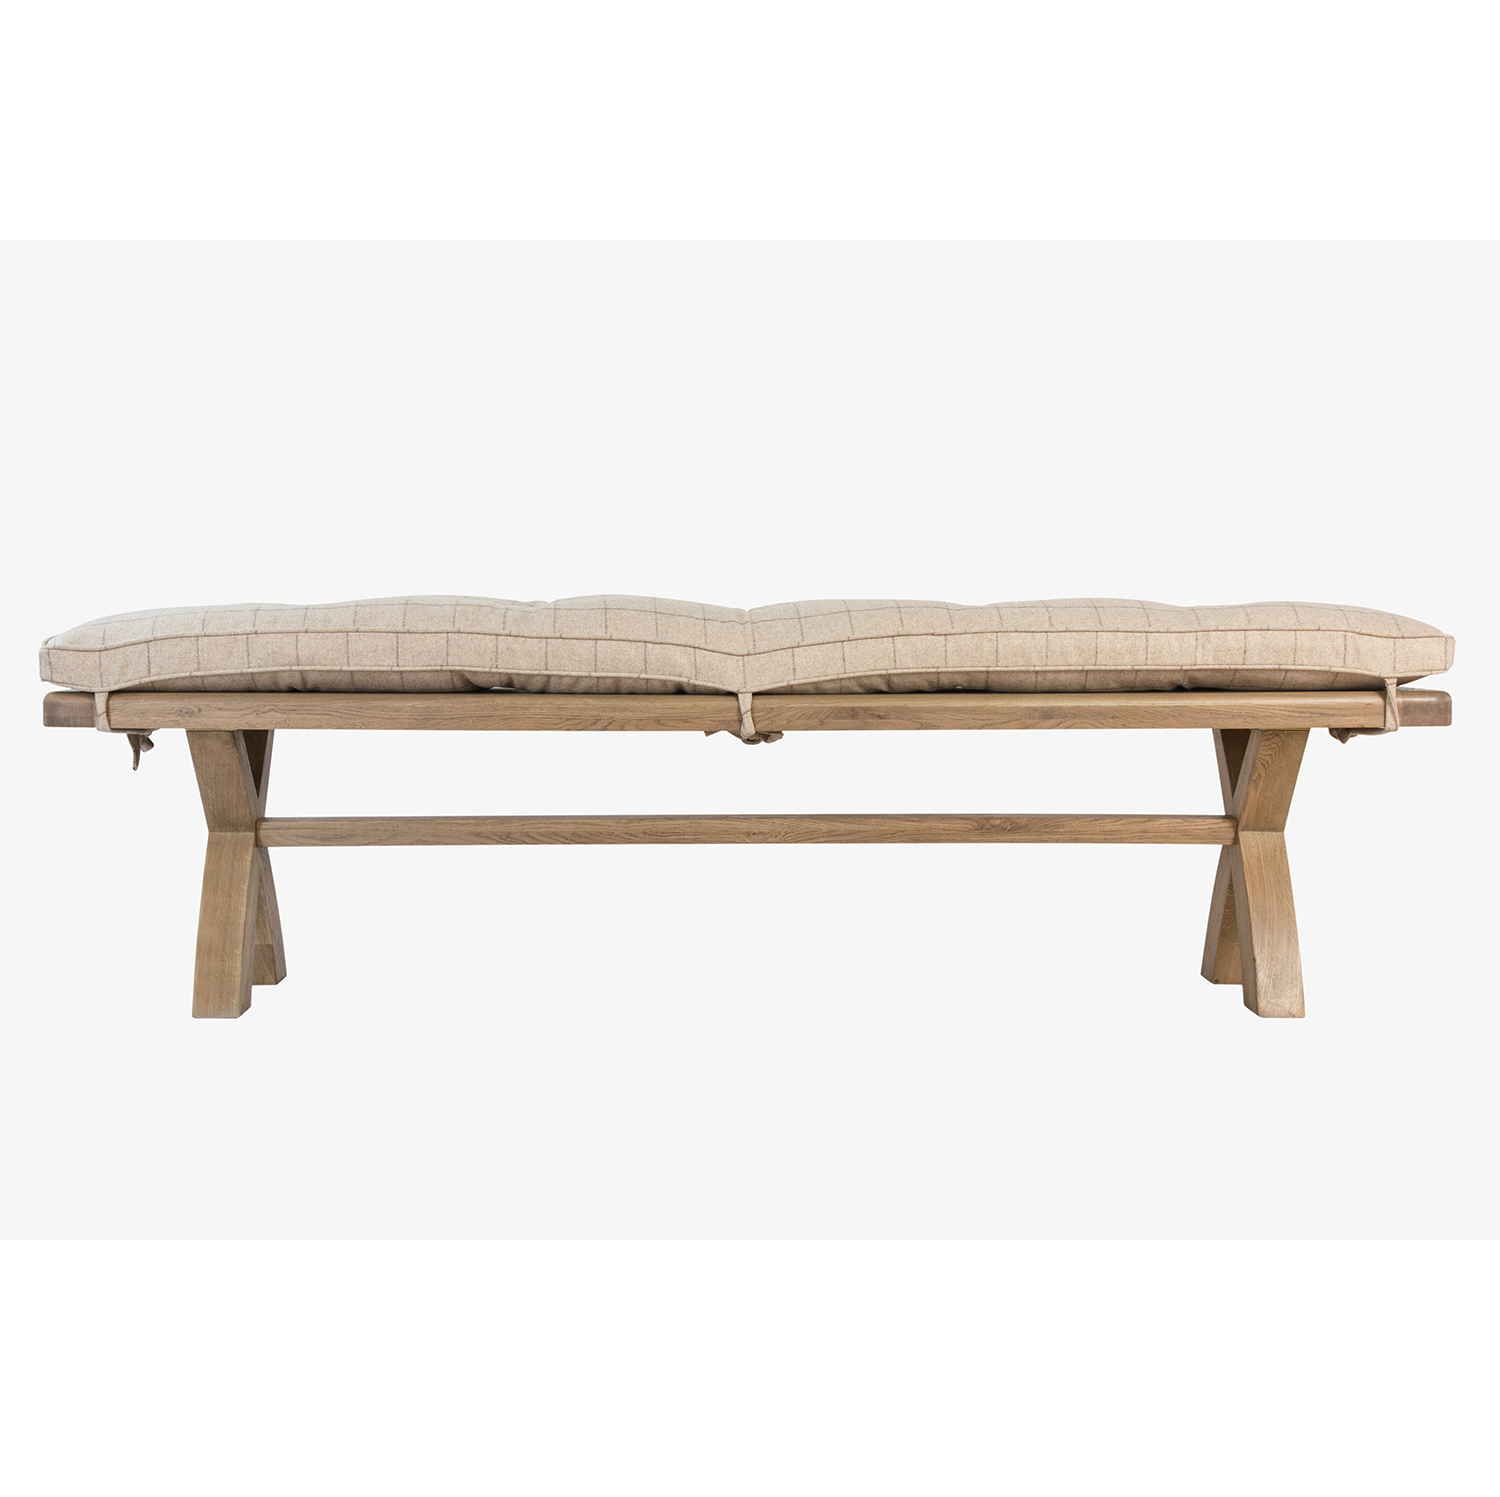 Heritage Oak Bench - Natural Check Cushion Only